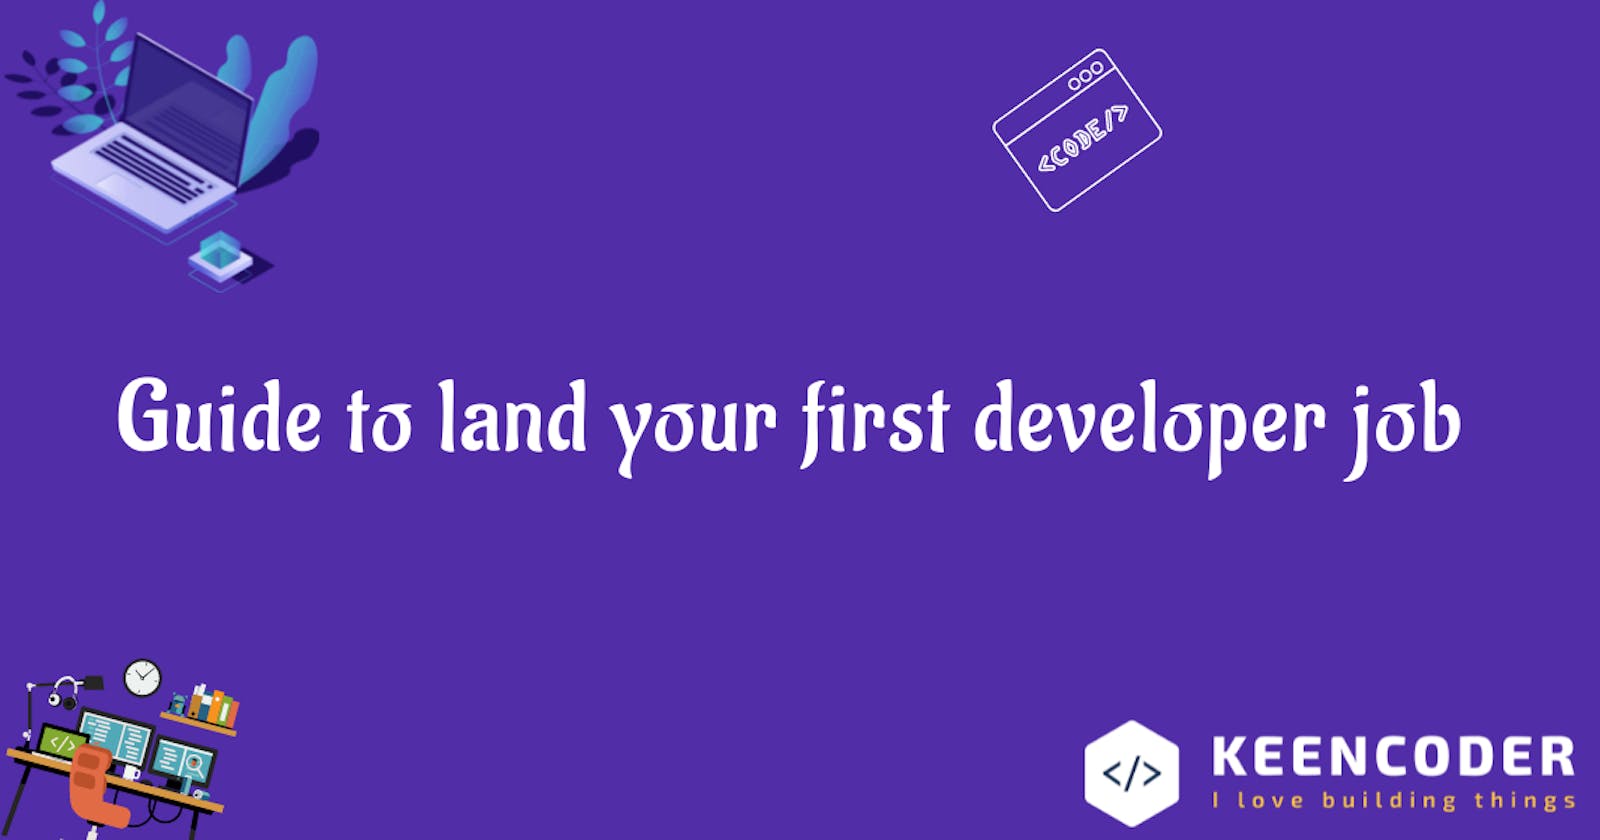 Guide to land your first developer job